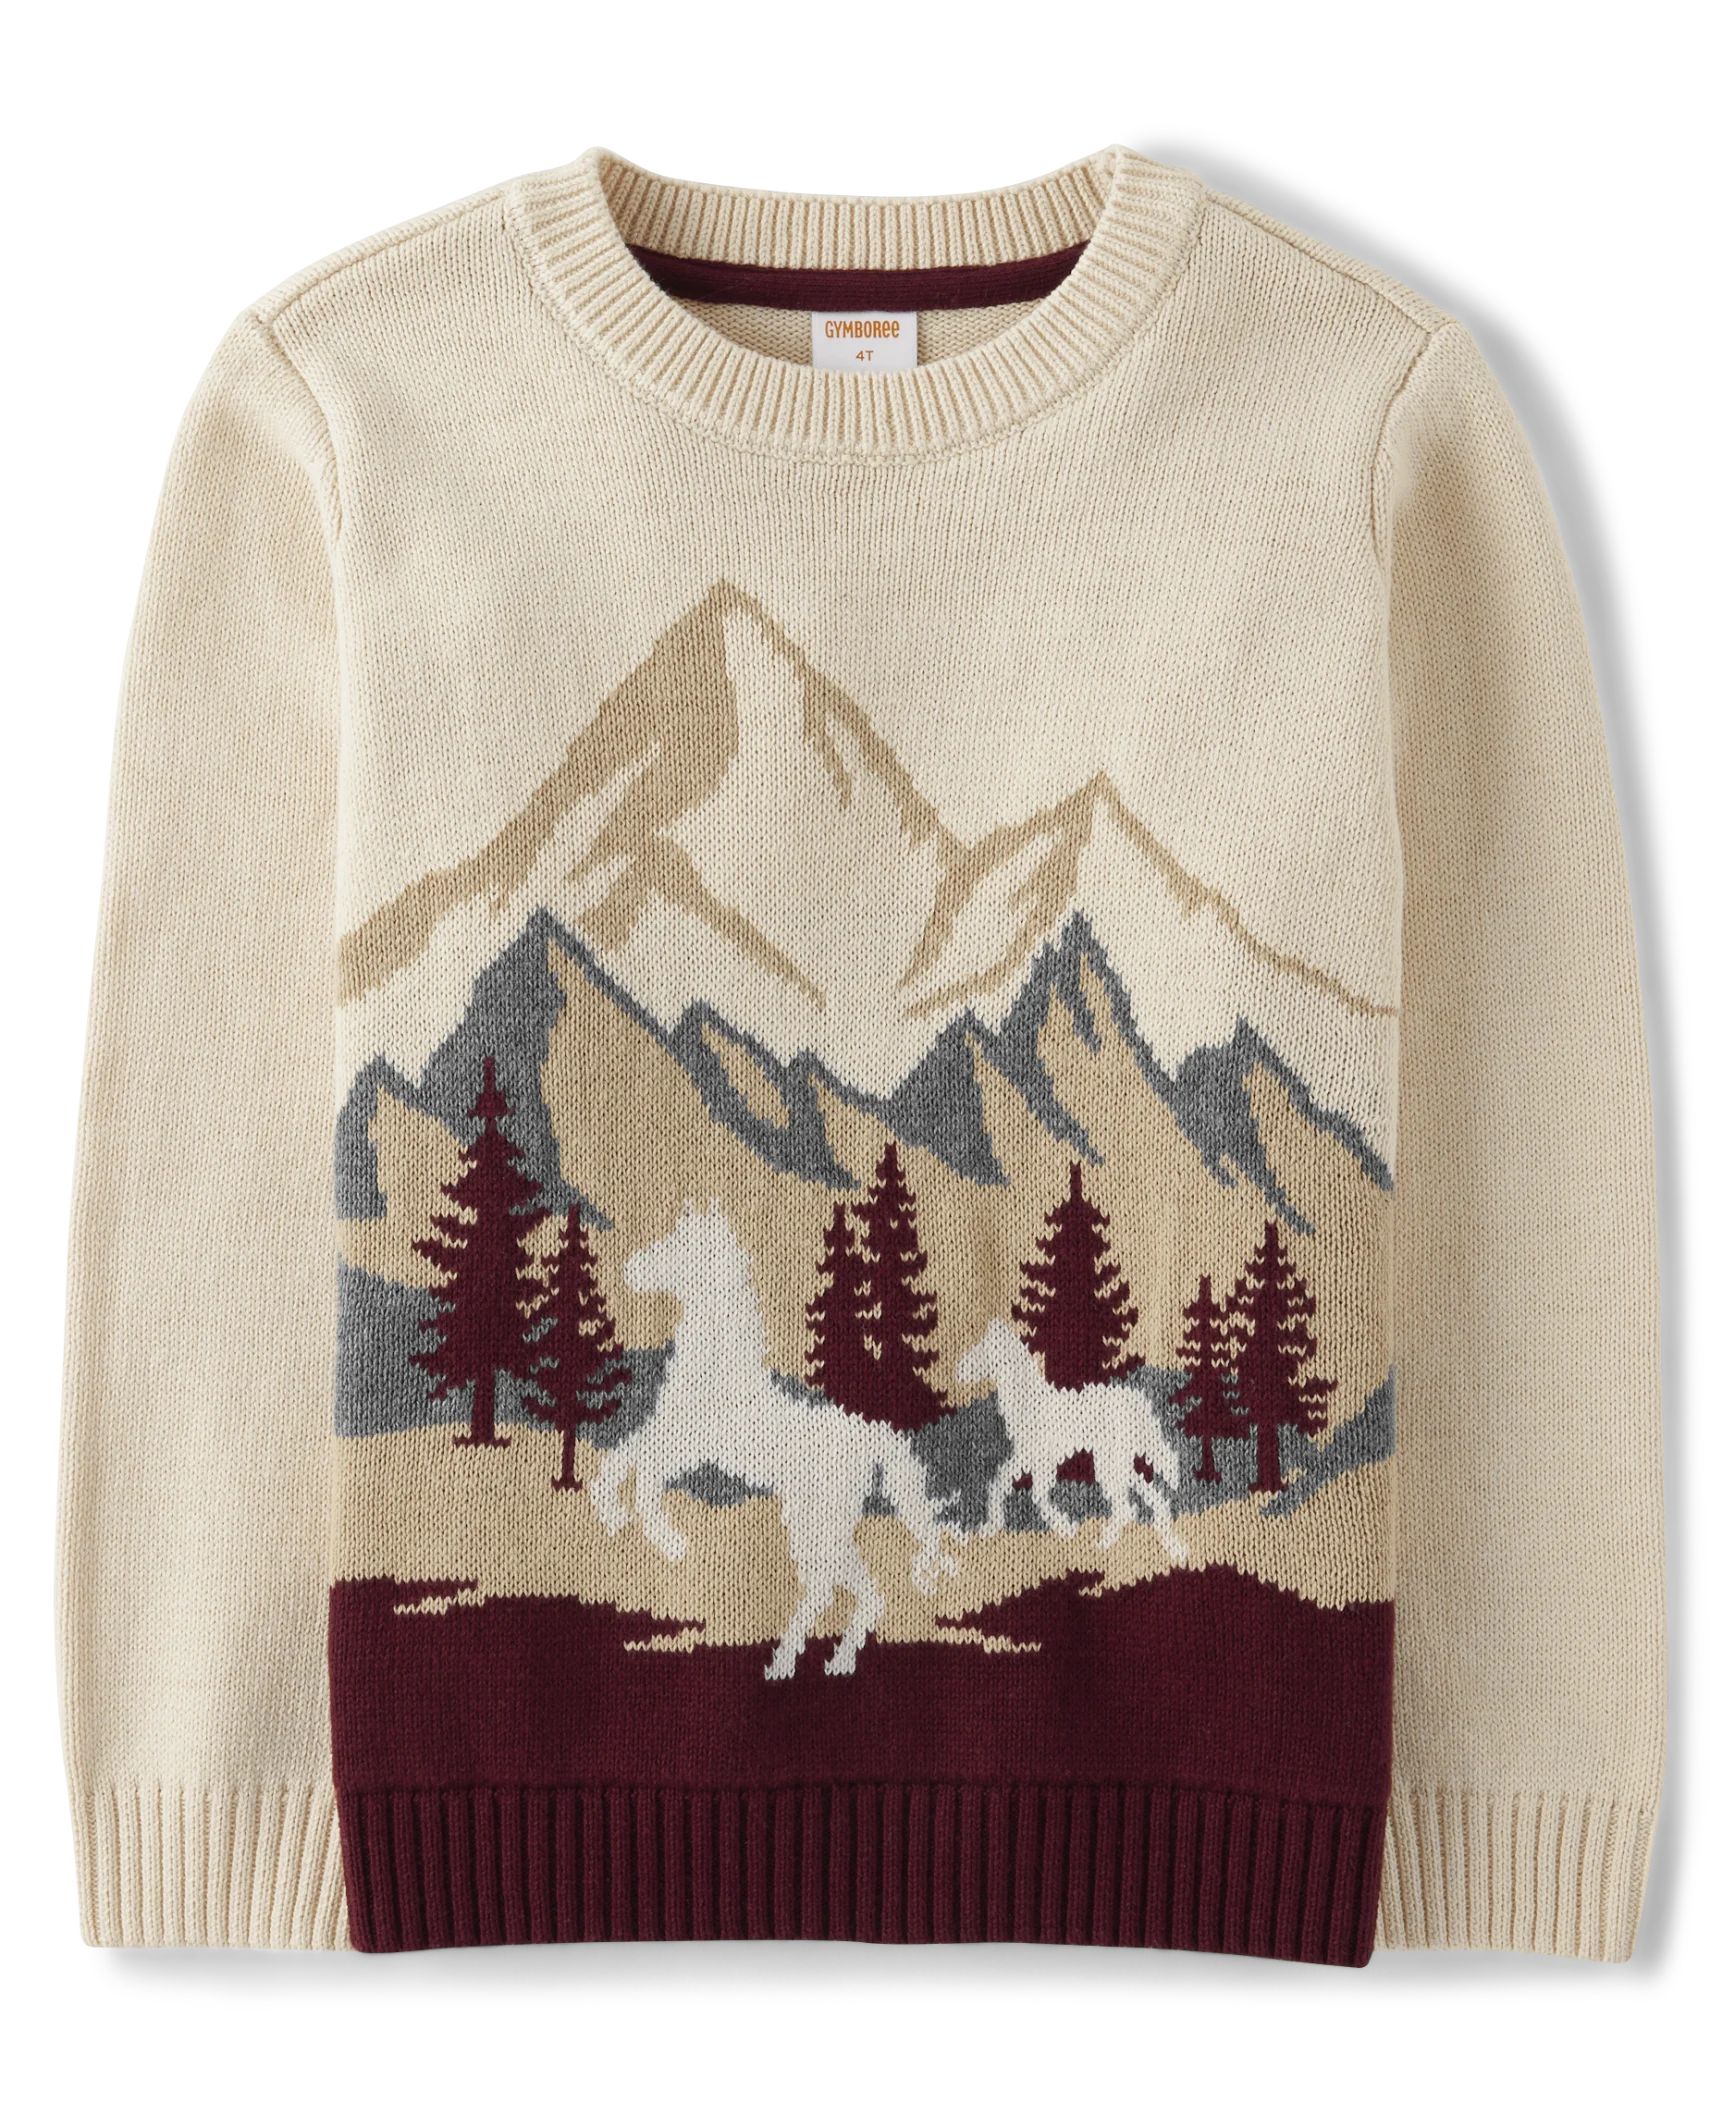 Boys Long Sleeve Embroidered Mountain Sweater - Rustic Ranch | The Children's Place | The Children's Place